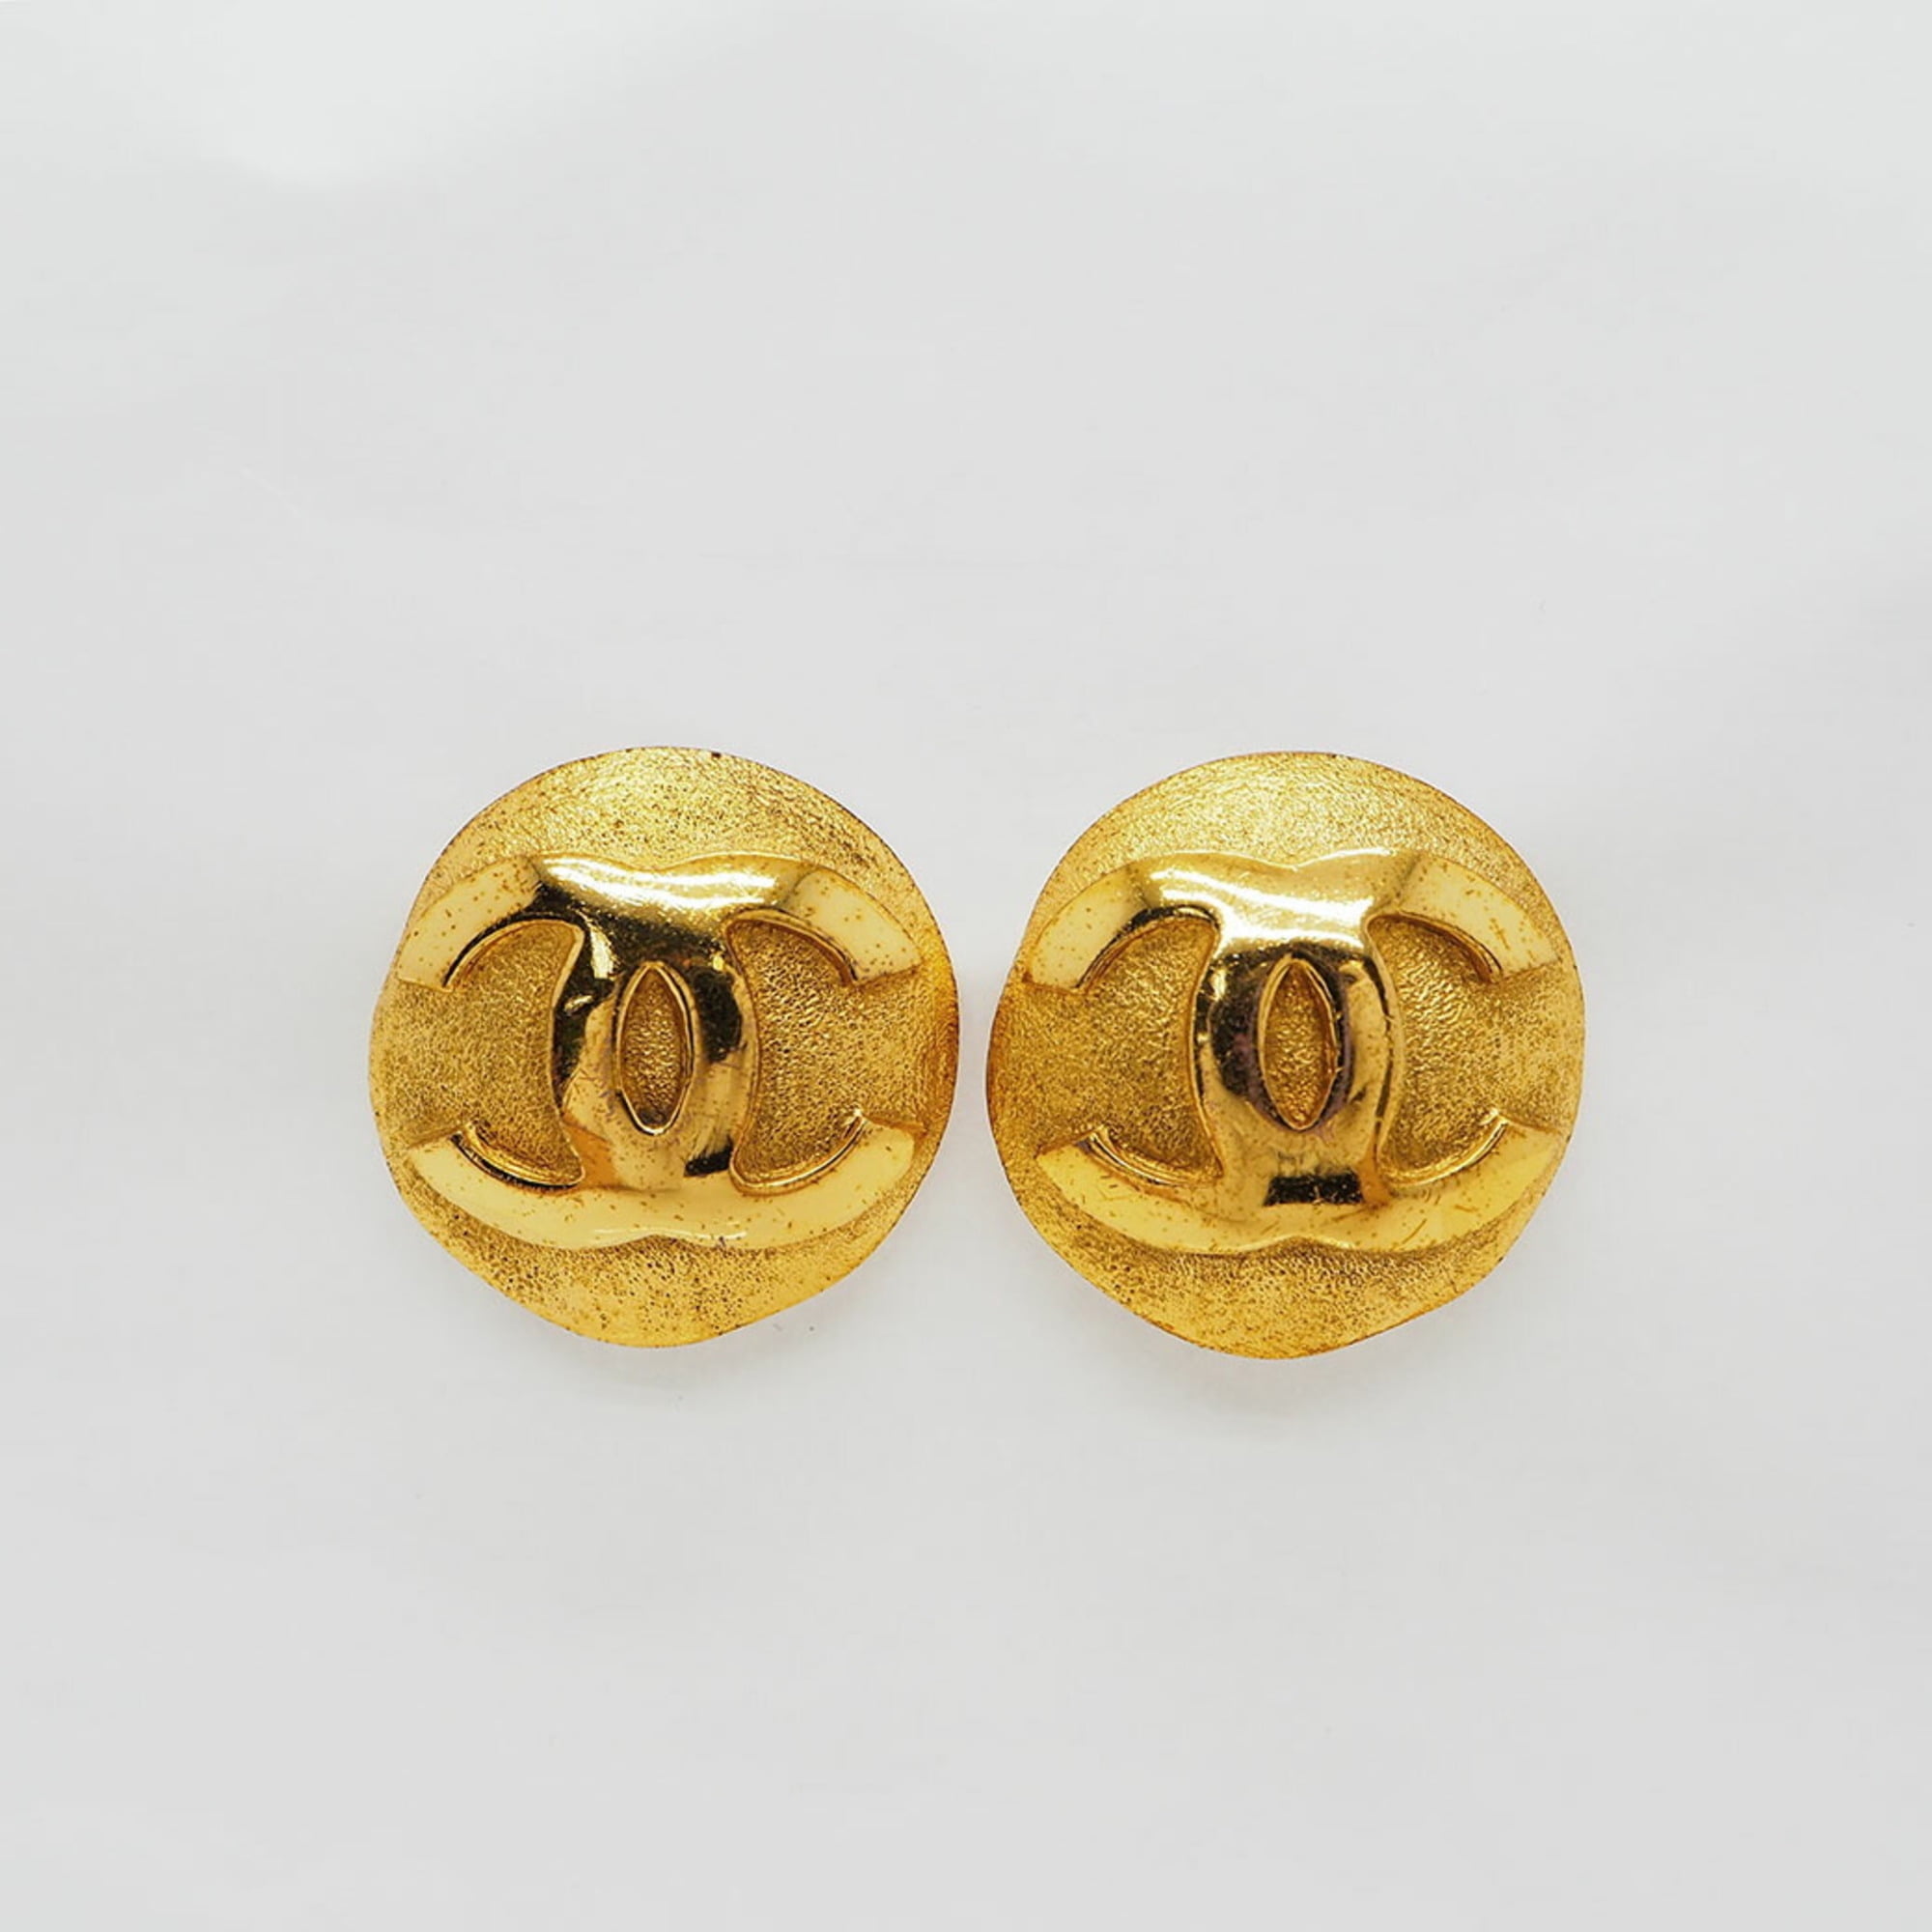 alliance bryder ud Bank Authenticated Used CHANEL 2 9 Coco Earrings Round Big Gold - Walmart.com